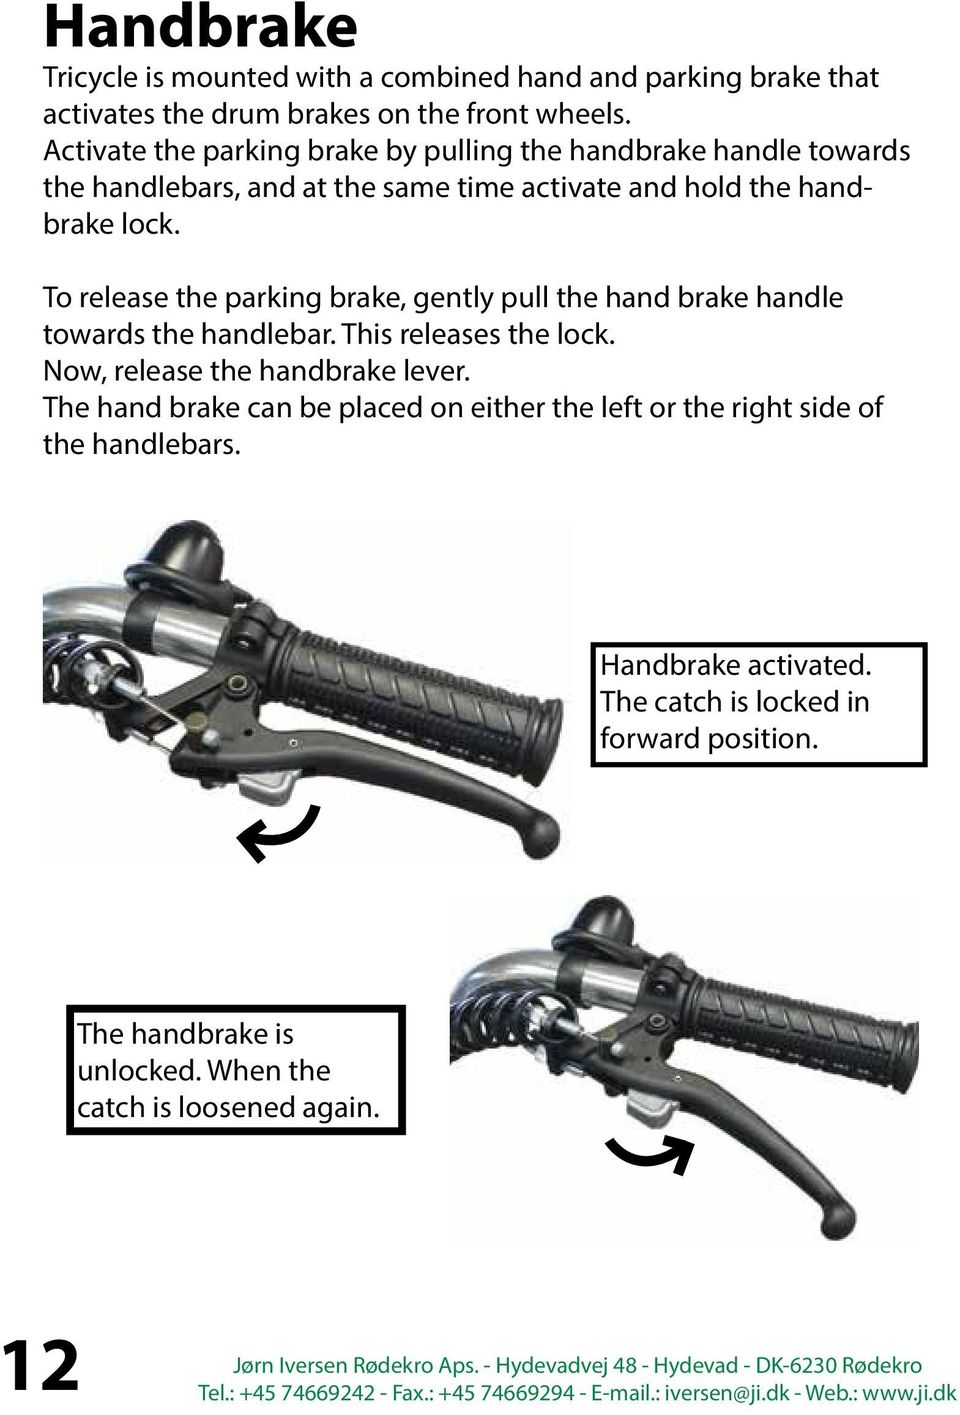 To release the parking brake, gently pull the hand brake handle towards the handlebar. This releases the lock. Now, release the handbrake lever.